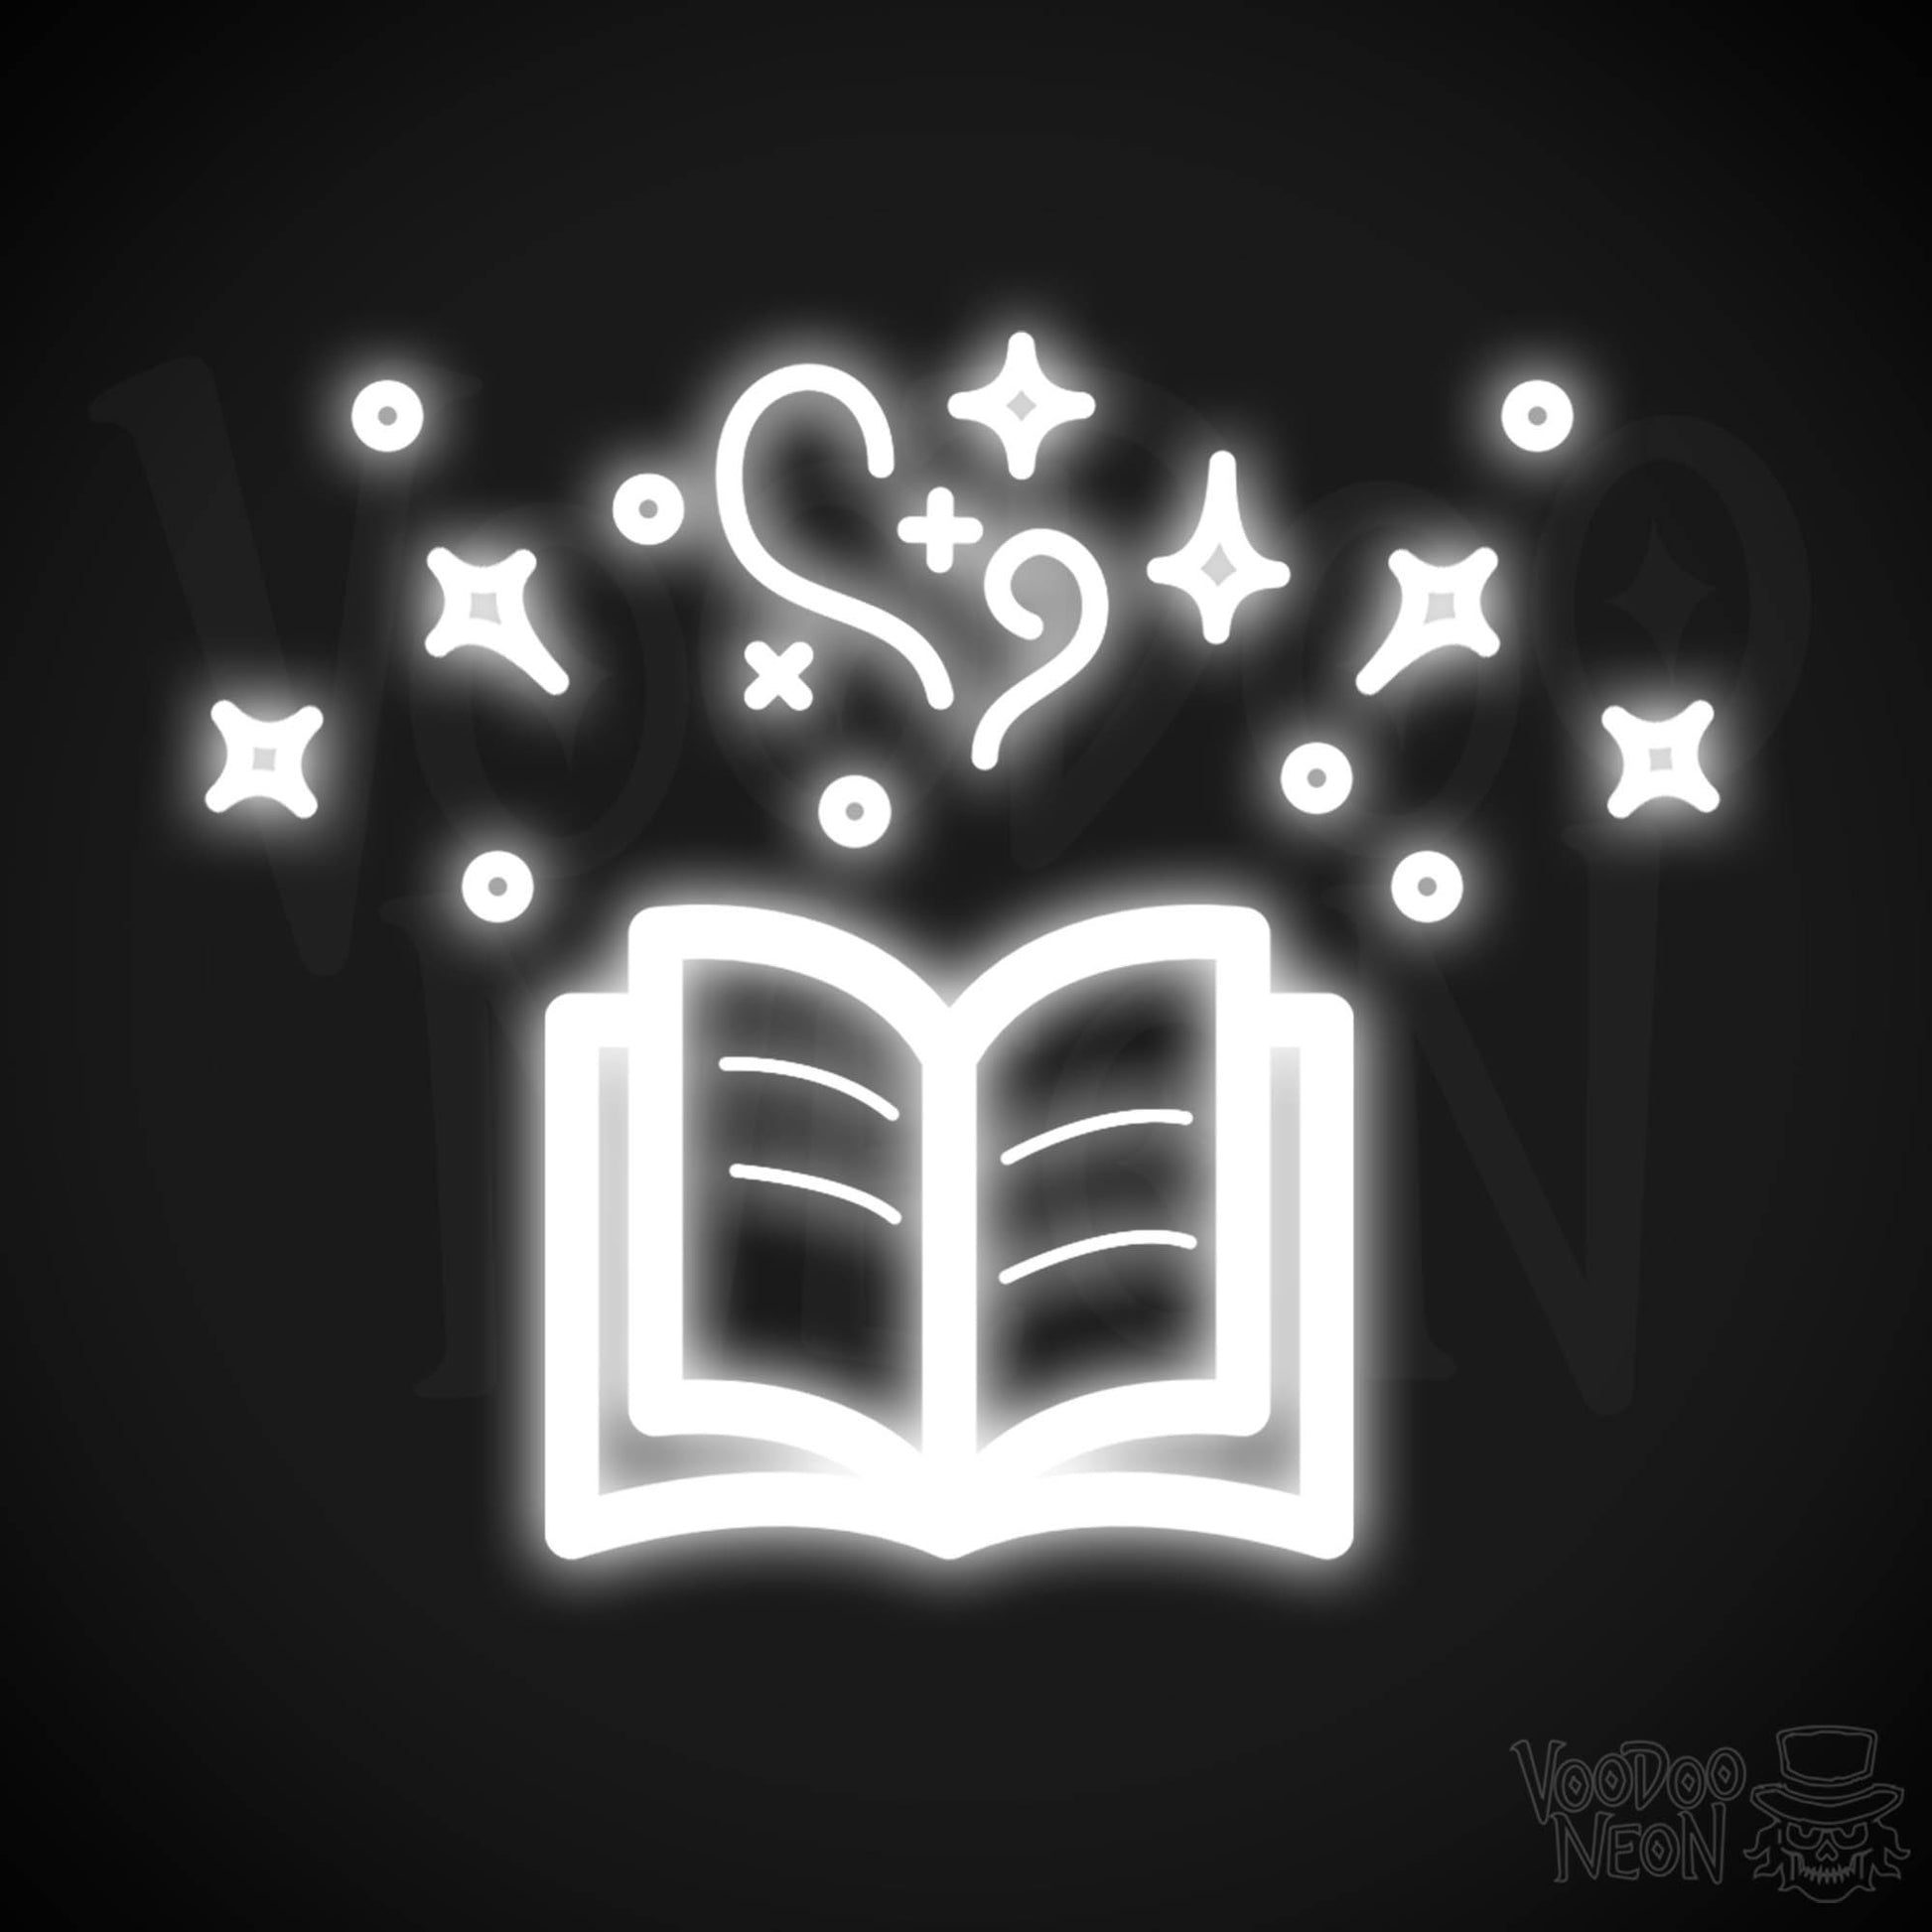 Neon Spell Book - Spell Book Neon Sign - LED Neon Wall Art - Color White